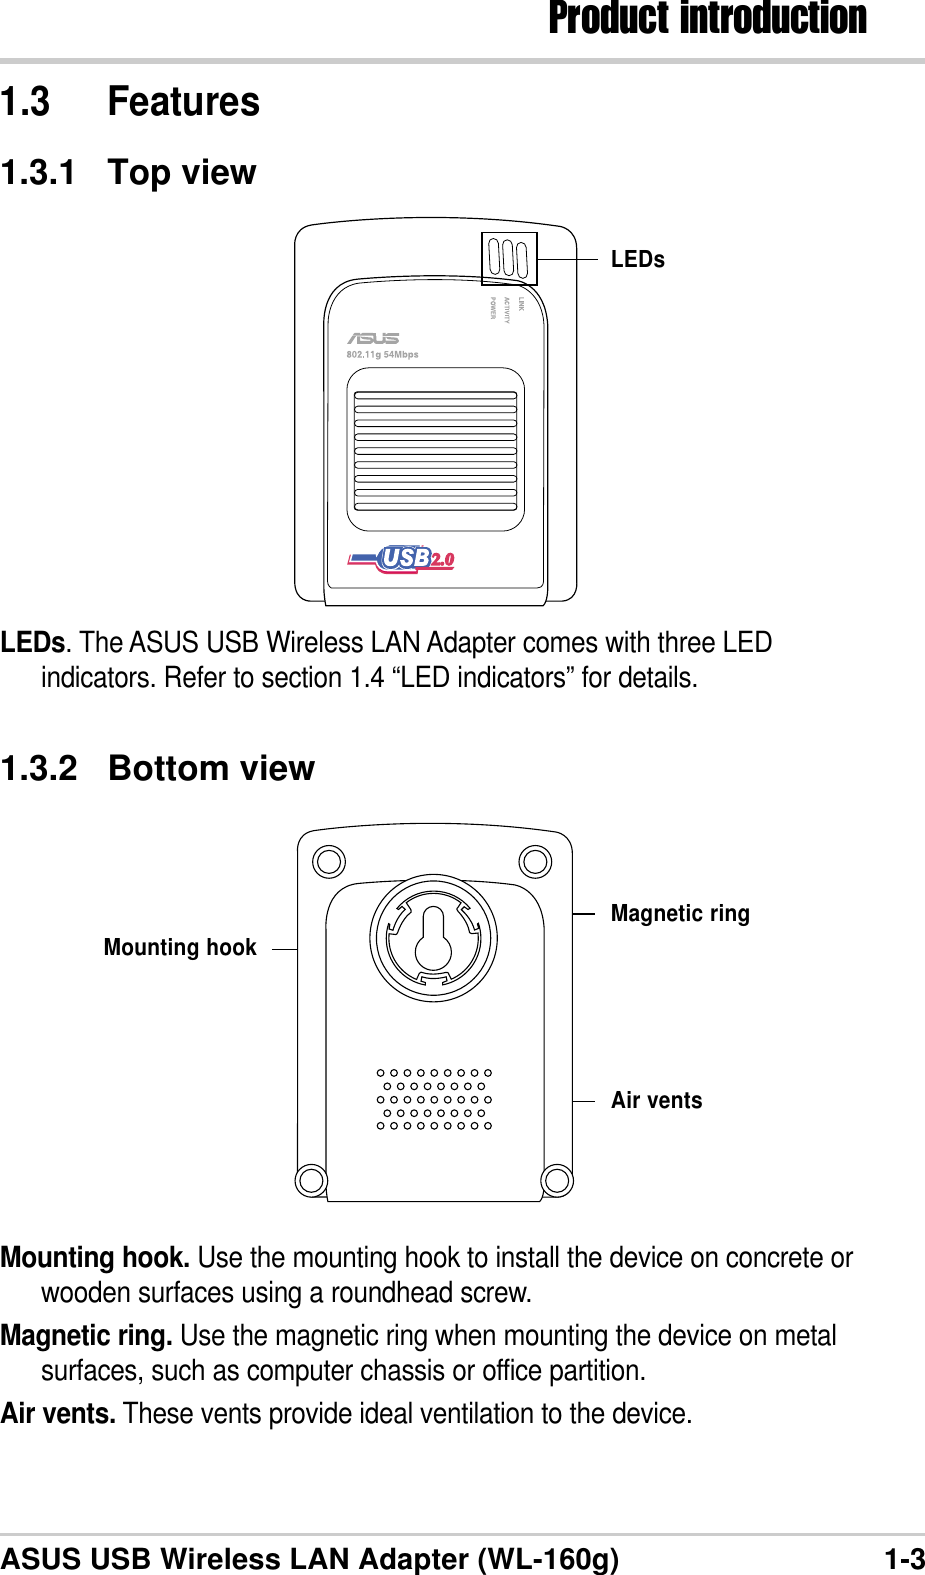 1-3Product introductionASUS USB Wireless LAN Adapter (WL-160g)1.3 Features1.3.1 Top viewLEDs. The ASUS USB Wireless LAN Adapter comes with three LEDindicators. Refer to section 1.4 “LED indicators” for details.LEDs1.3.2 Bottom viewMounting hook. Use the mounting hook to install the device on concrete orwooden surfaces using a roundhead screw.Magnetic ring. Use the magnetic ring when mounting the device on metalsurfaces, such as computer chassis or office partition.Air vents. These vents provide ideal ventilation to the device.Mounting hookMagnetic ringAir vents